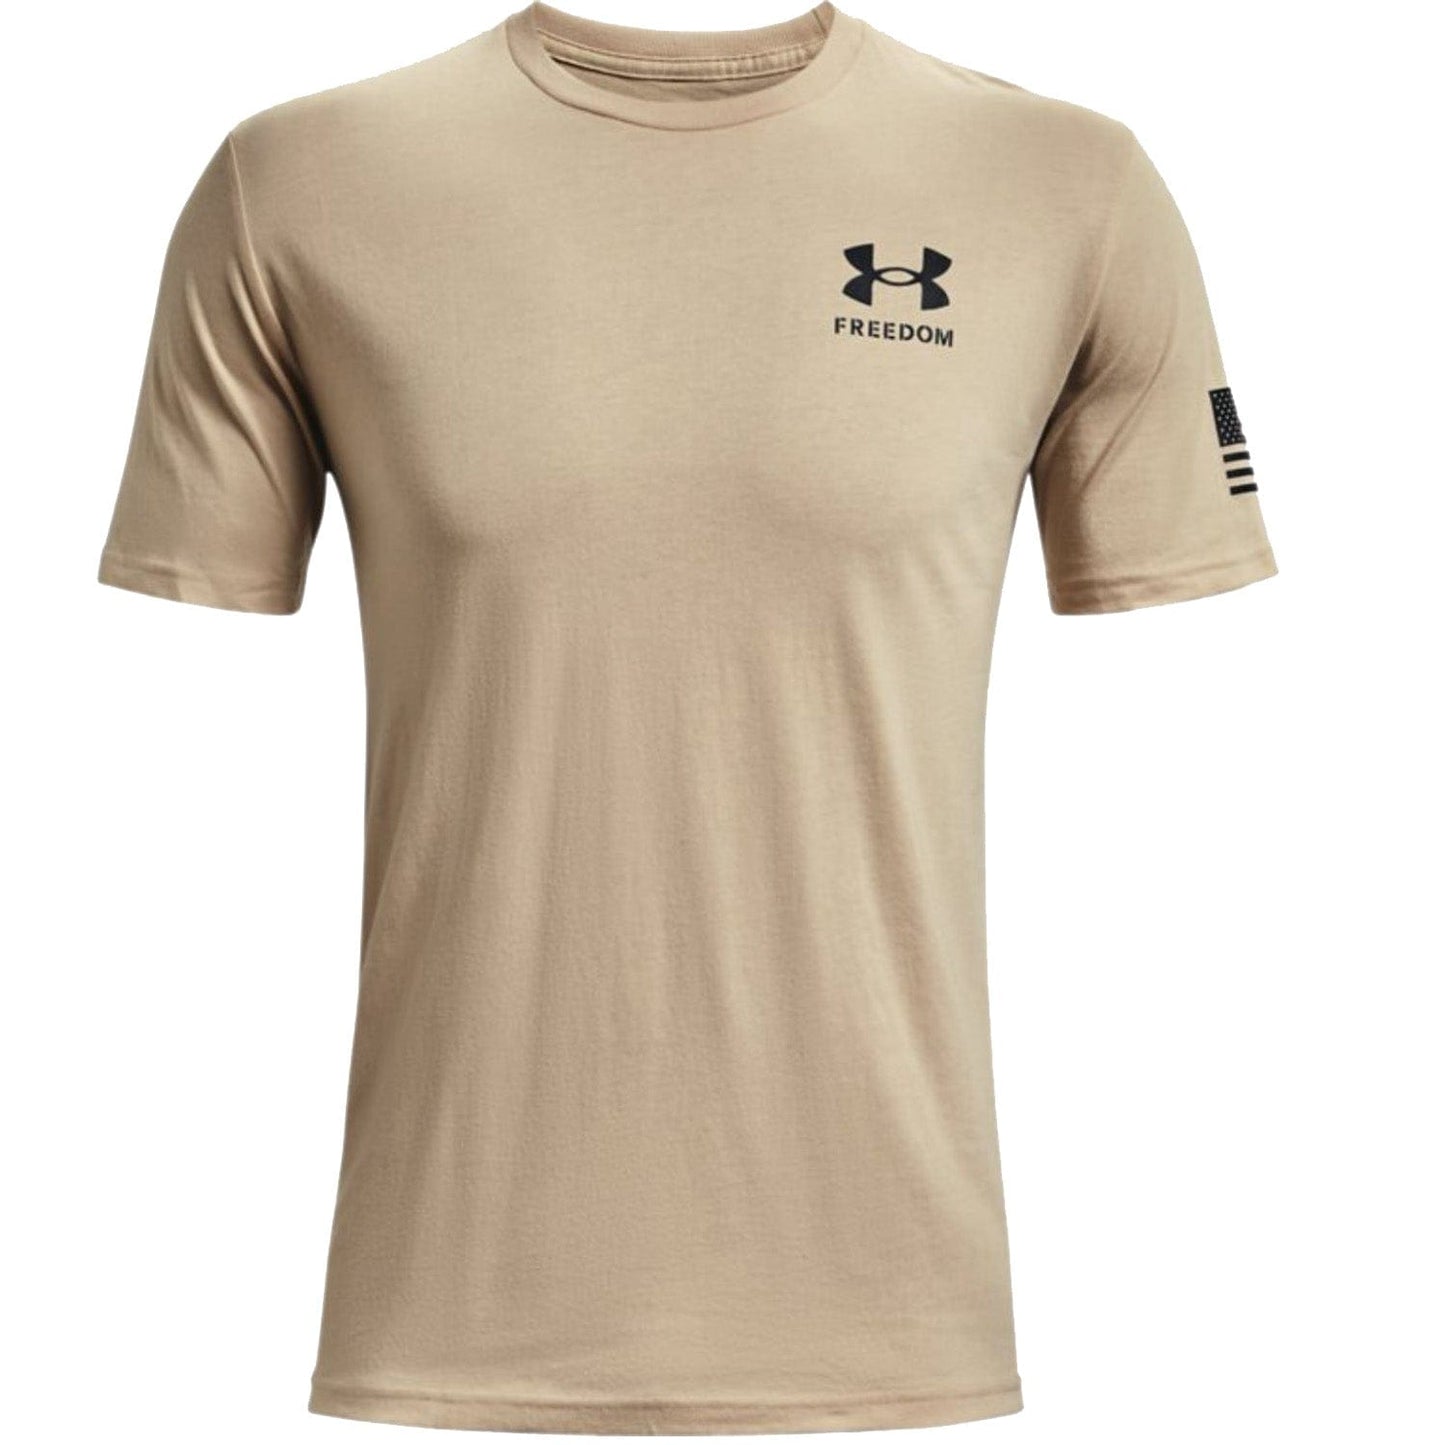 Under Armour New Freedom Flag T by Texas Fowlers